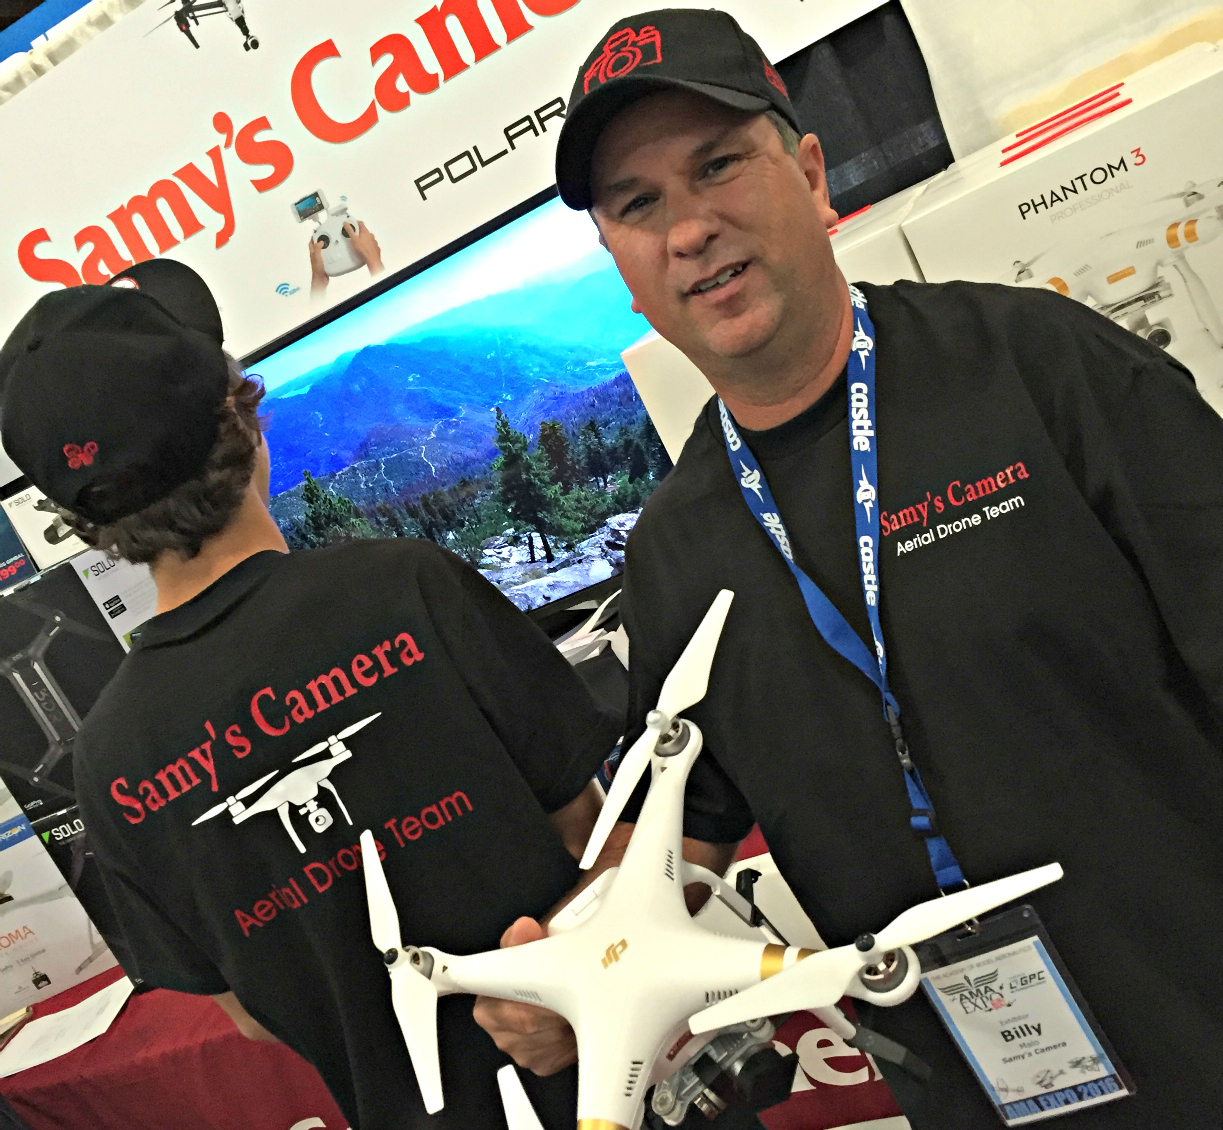 Samy's Camera's Aerial Drone Team At The AMA Expo 2016